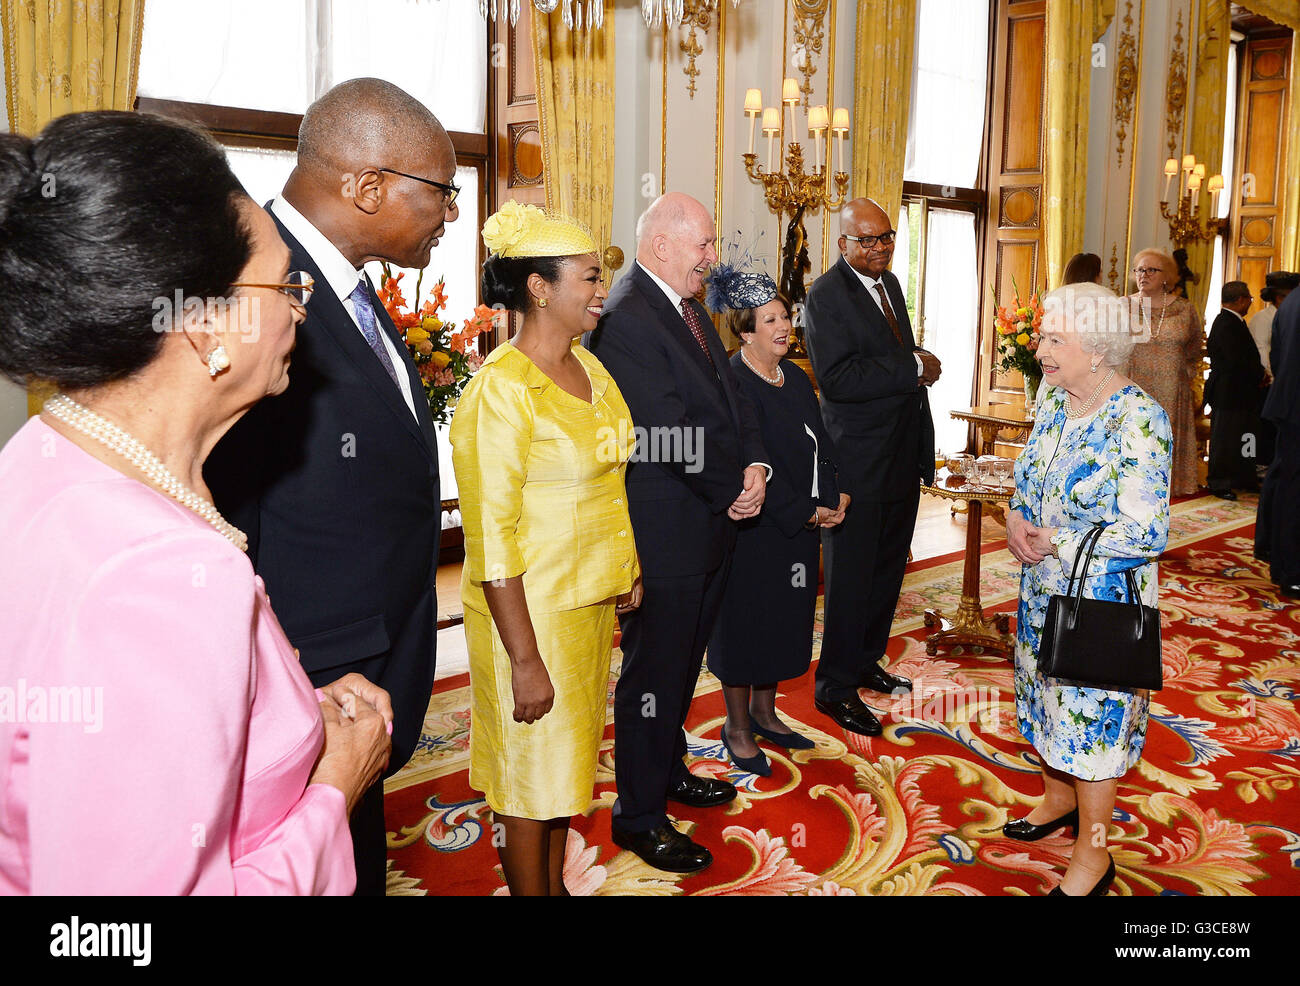 Queen Elizabeth II meets guests during a reception ahead of the Governor General's lunch at Buckingham Palace in London. Stock Photo